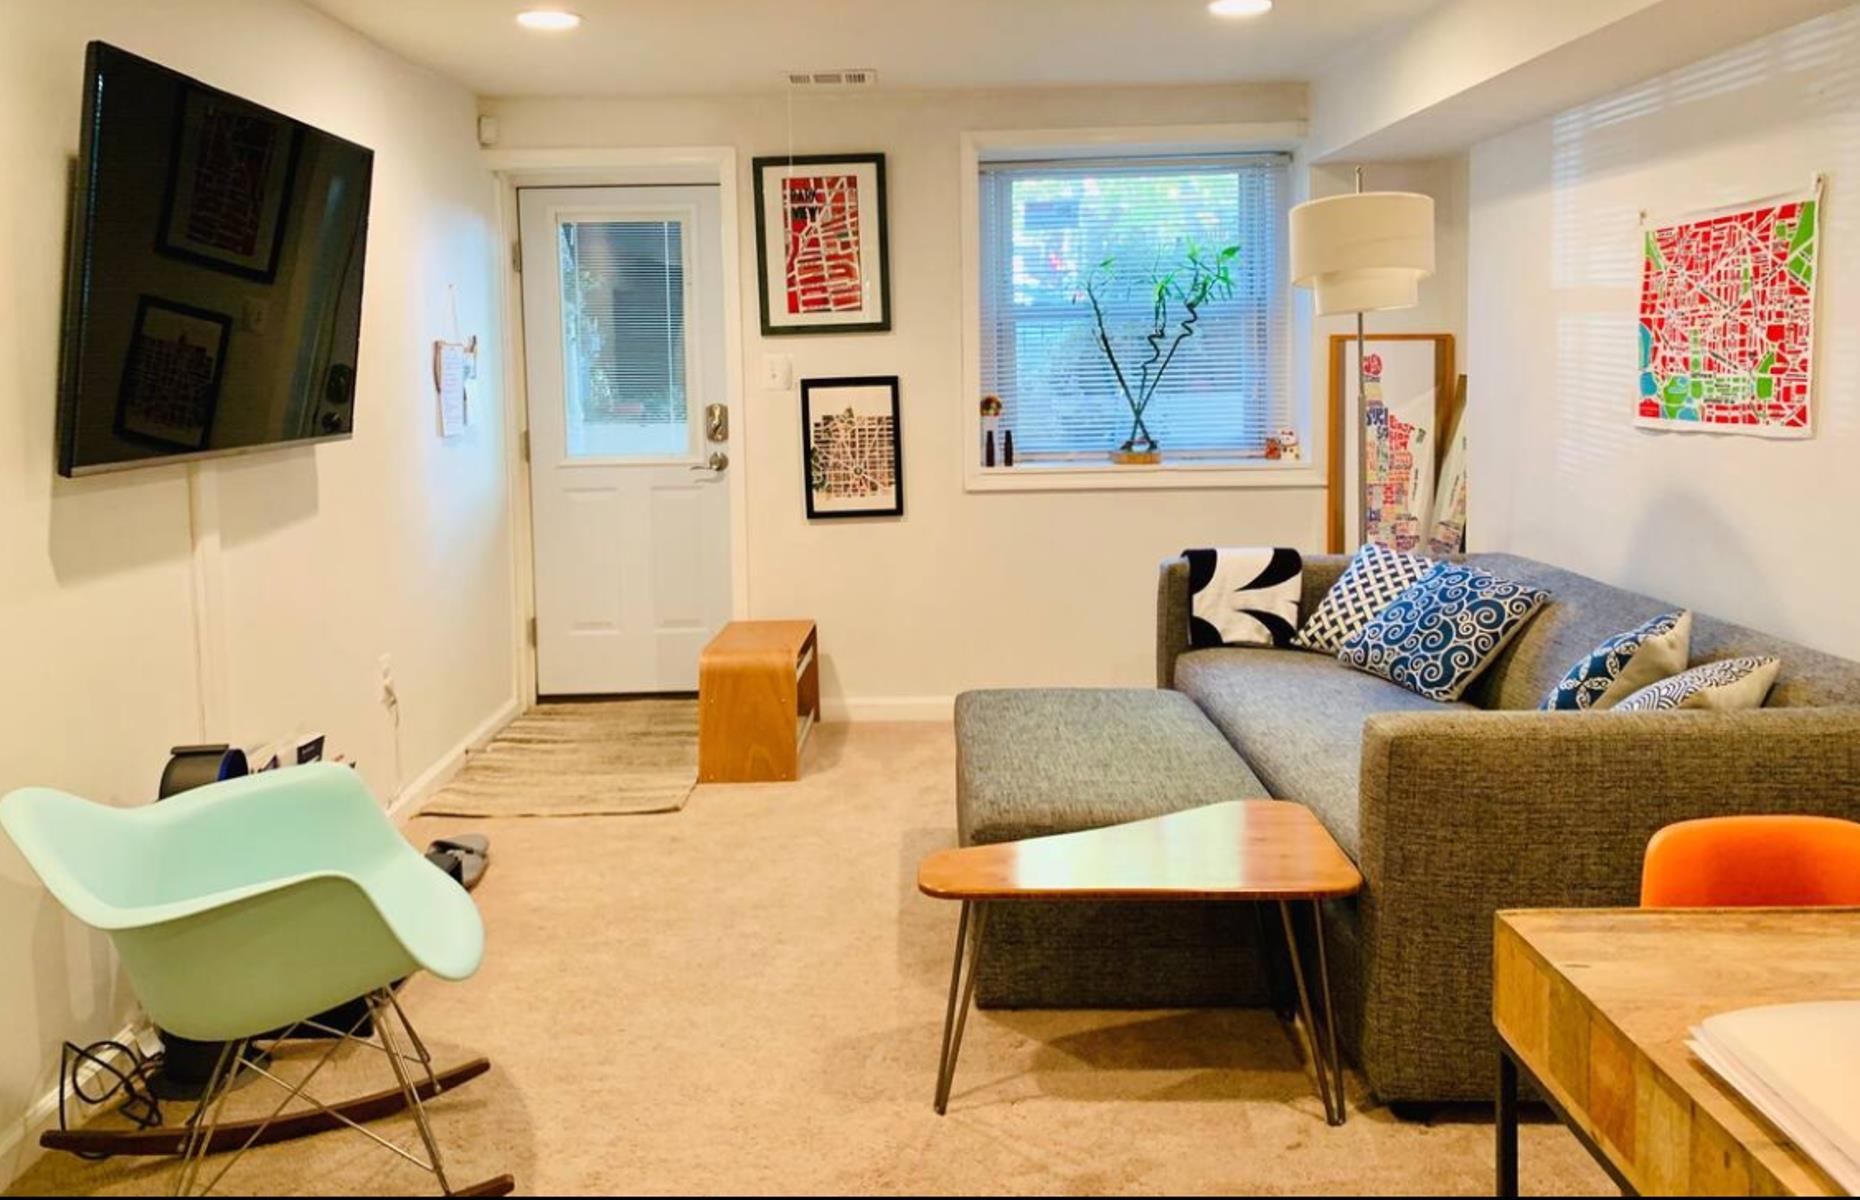 <p>This <a href="https://www.airbnb.co.uk/rooms/17944042">self-contained suite</a>, in an early 20th-century townhouse between Washington DC’s vibrant Columbia Heights and Park View neighborhoods, has a near-perfect rating on Airbnb – and it’s an absolute bargain at around $95 a night. You get a lot for the money, with a separate bedroom with queen bed and a living space with cozy sofa and well-equipped kitchenette. It has desk space and is accessed via its own entrance too.</p>